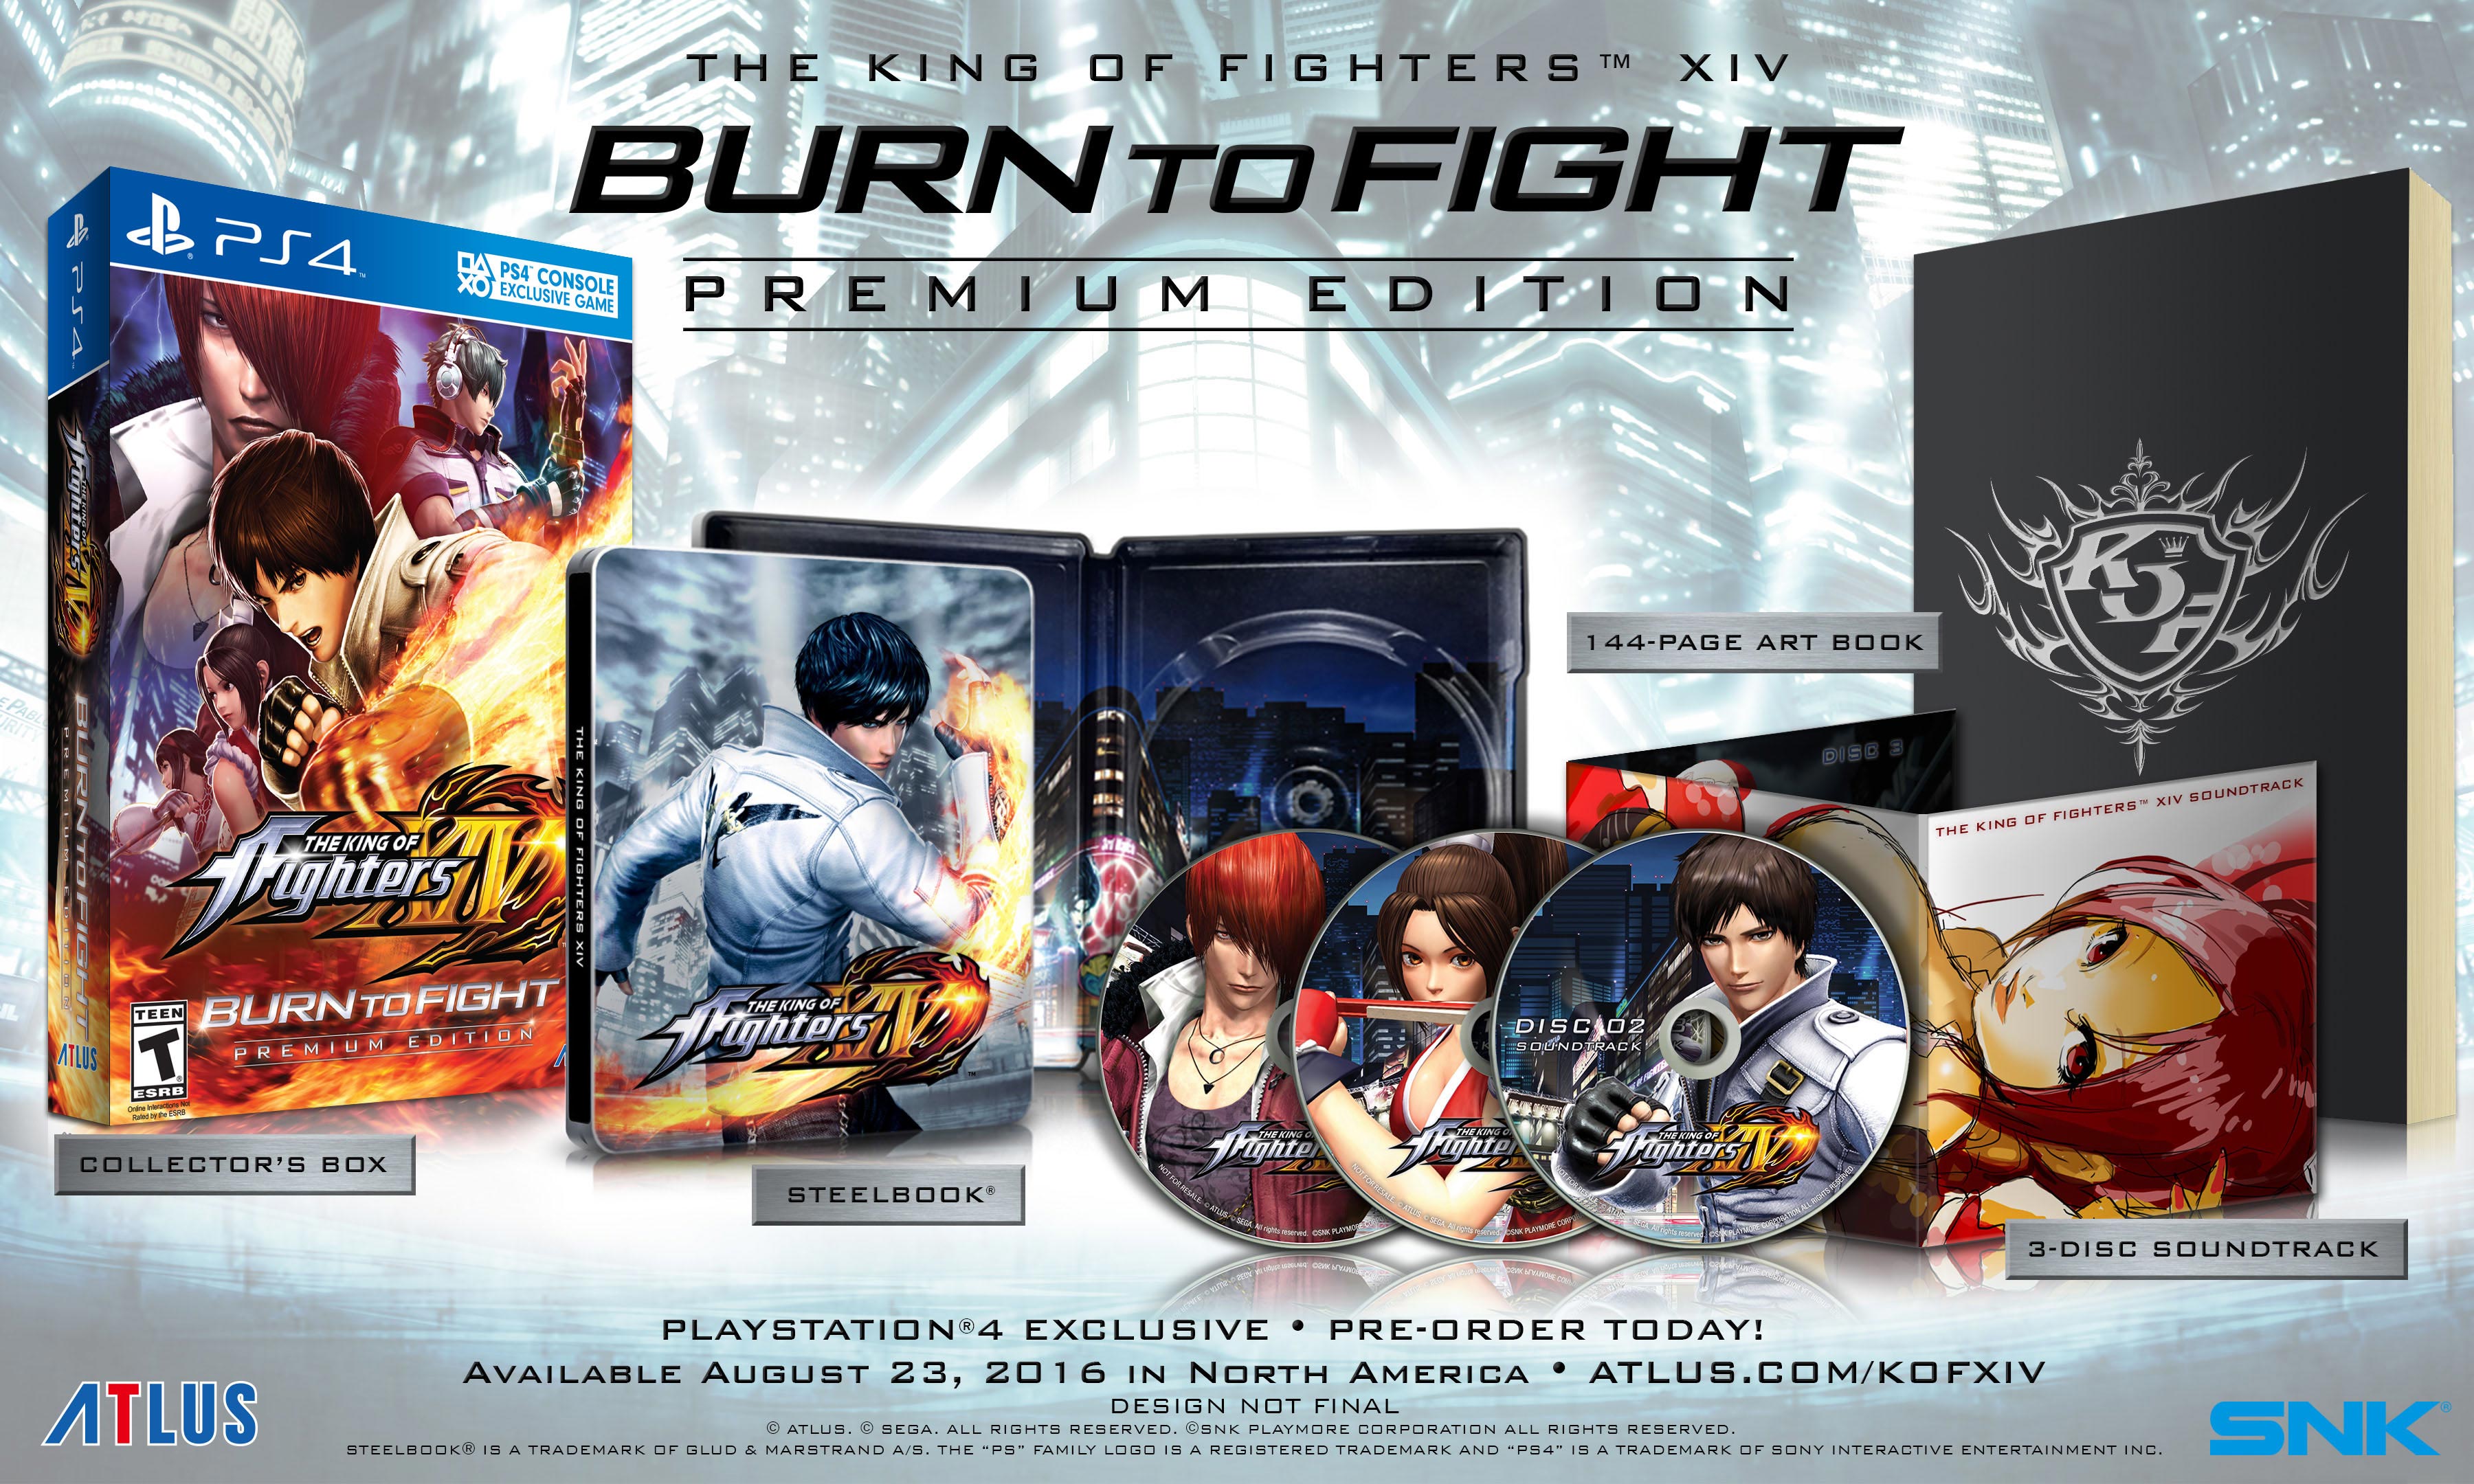 THE KING OF FIGHTERS XIV Burn to Fight Premium Edition